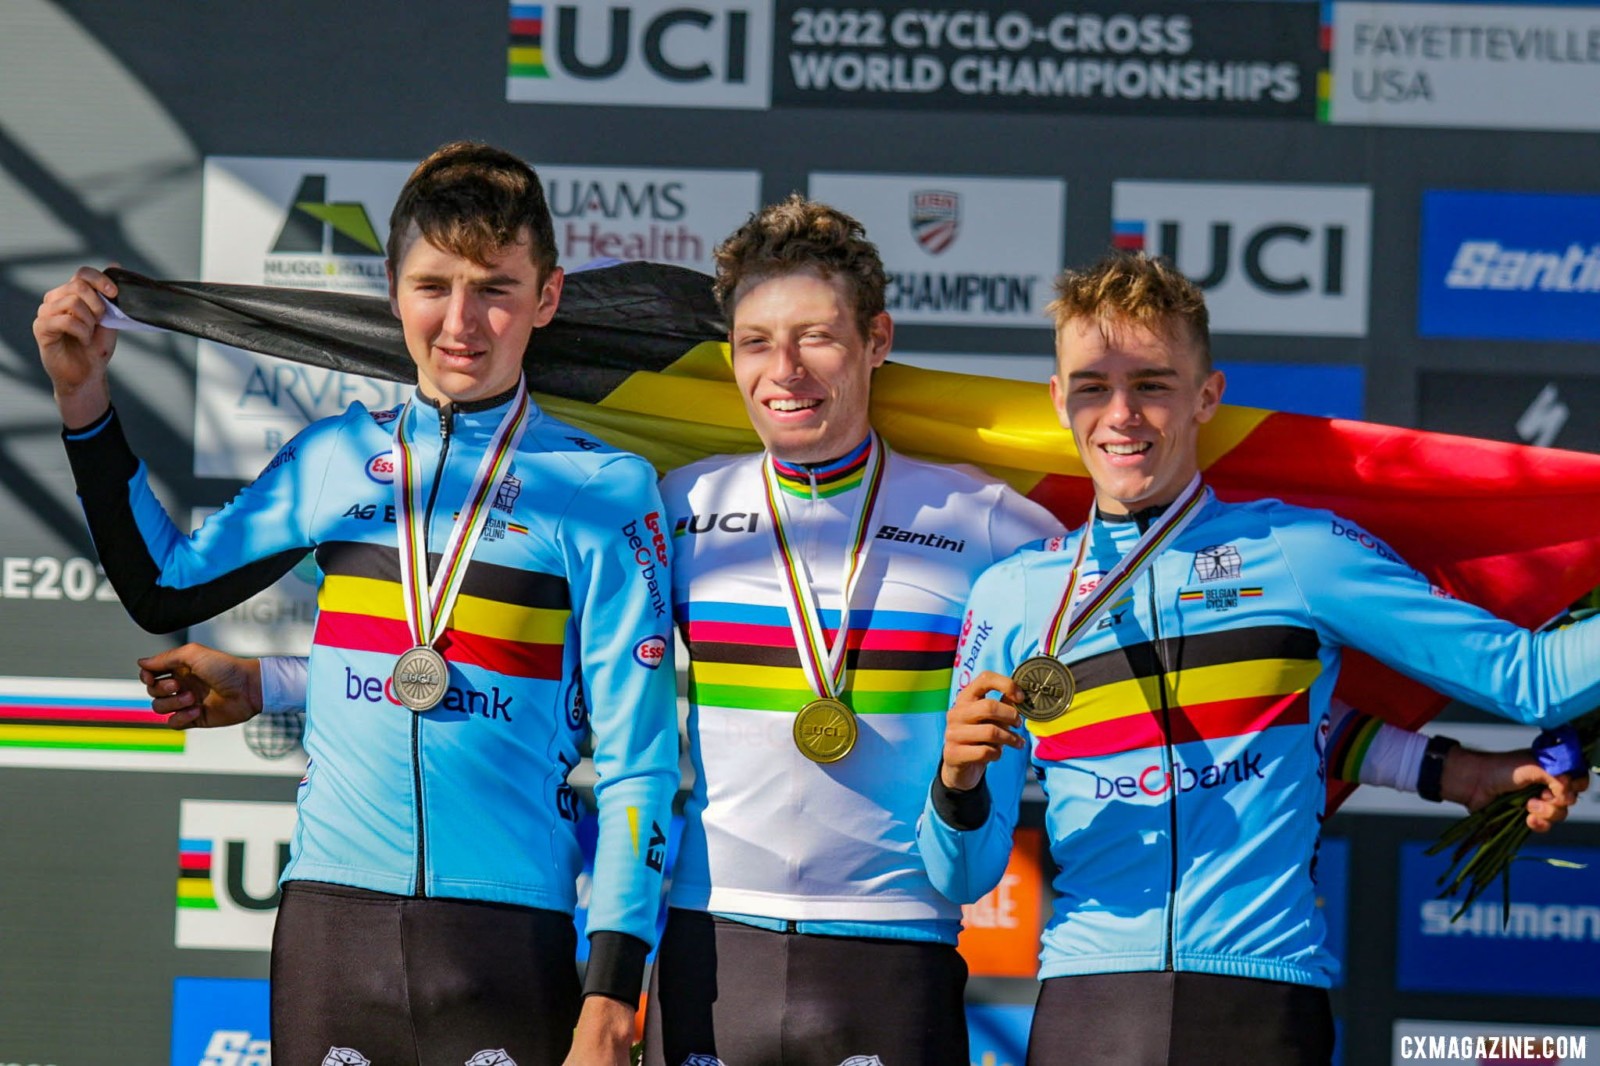 The Belgians sweep the U23 Men's race. 2022 Cyclocross World Championships, Fayetteville, Arkansas USA. © D. Mable / Cyclocross Magazine